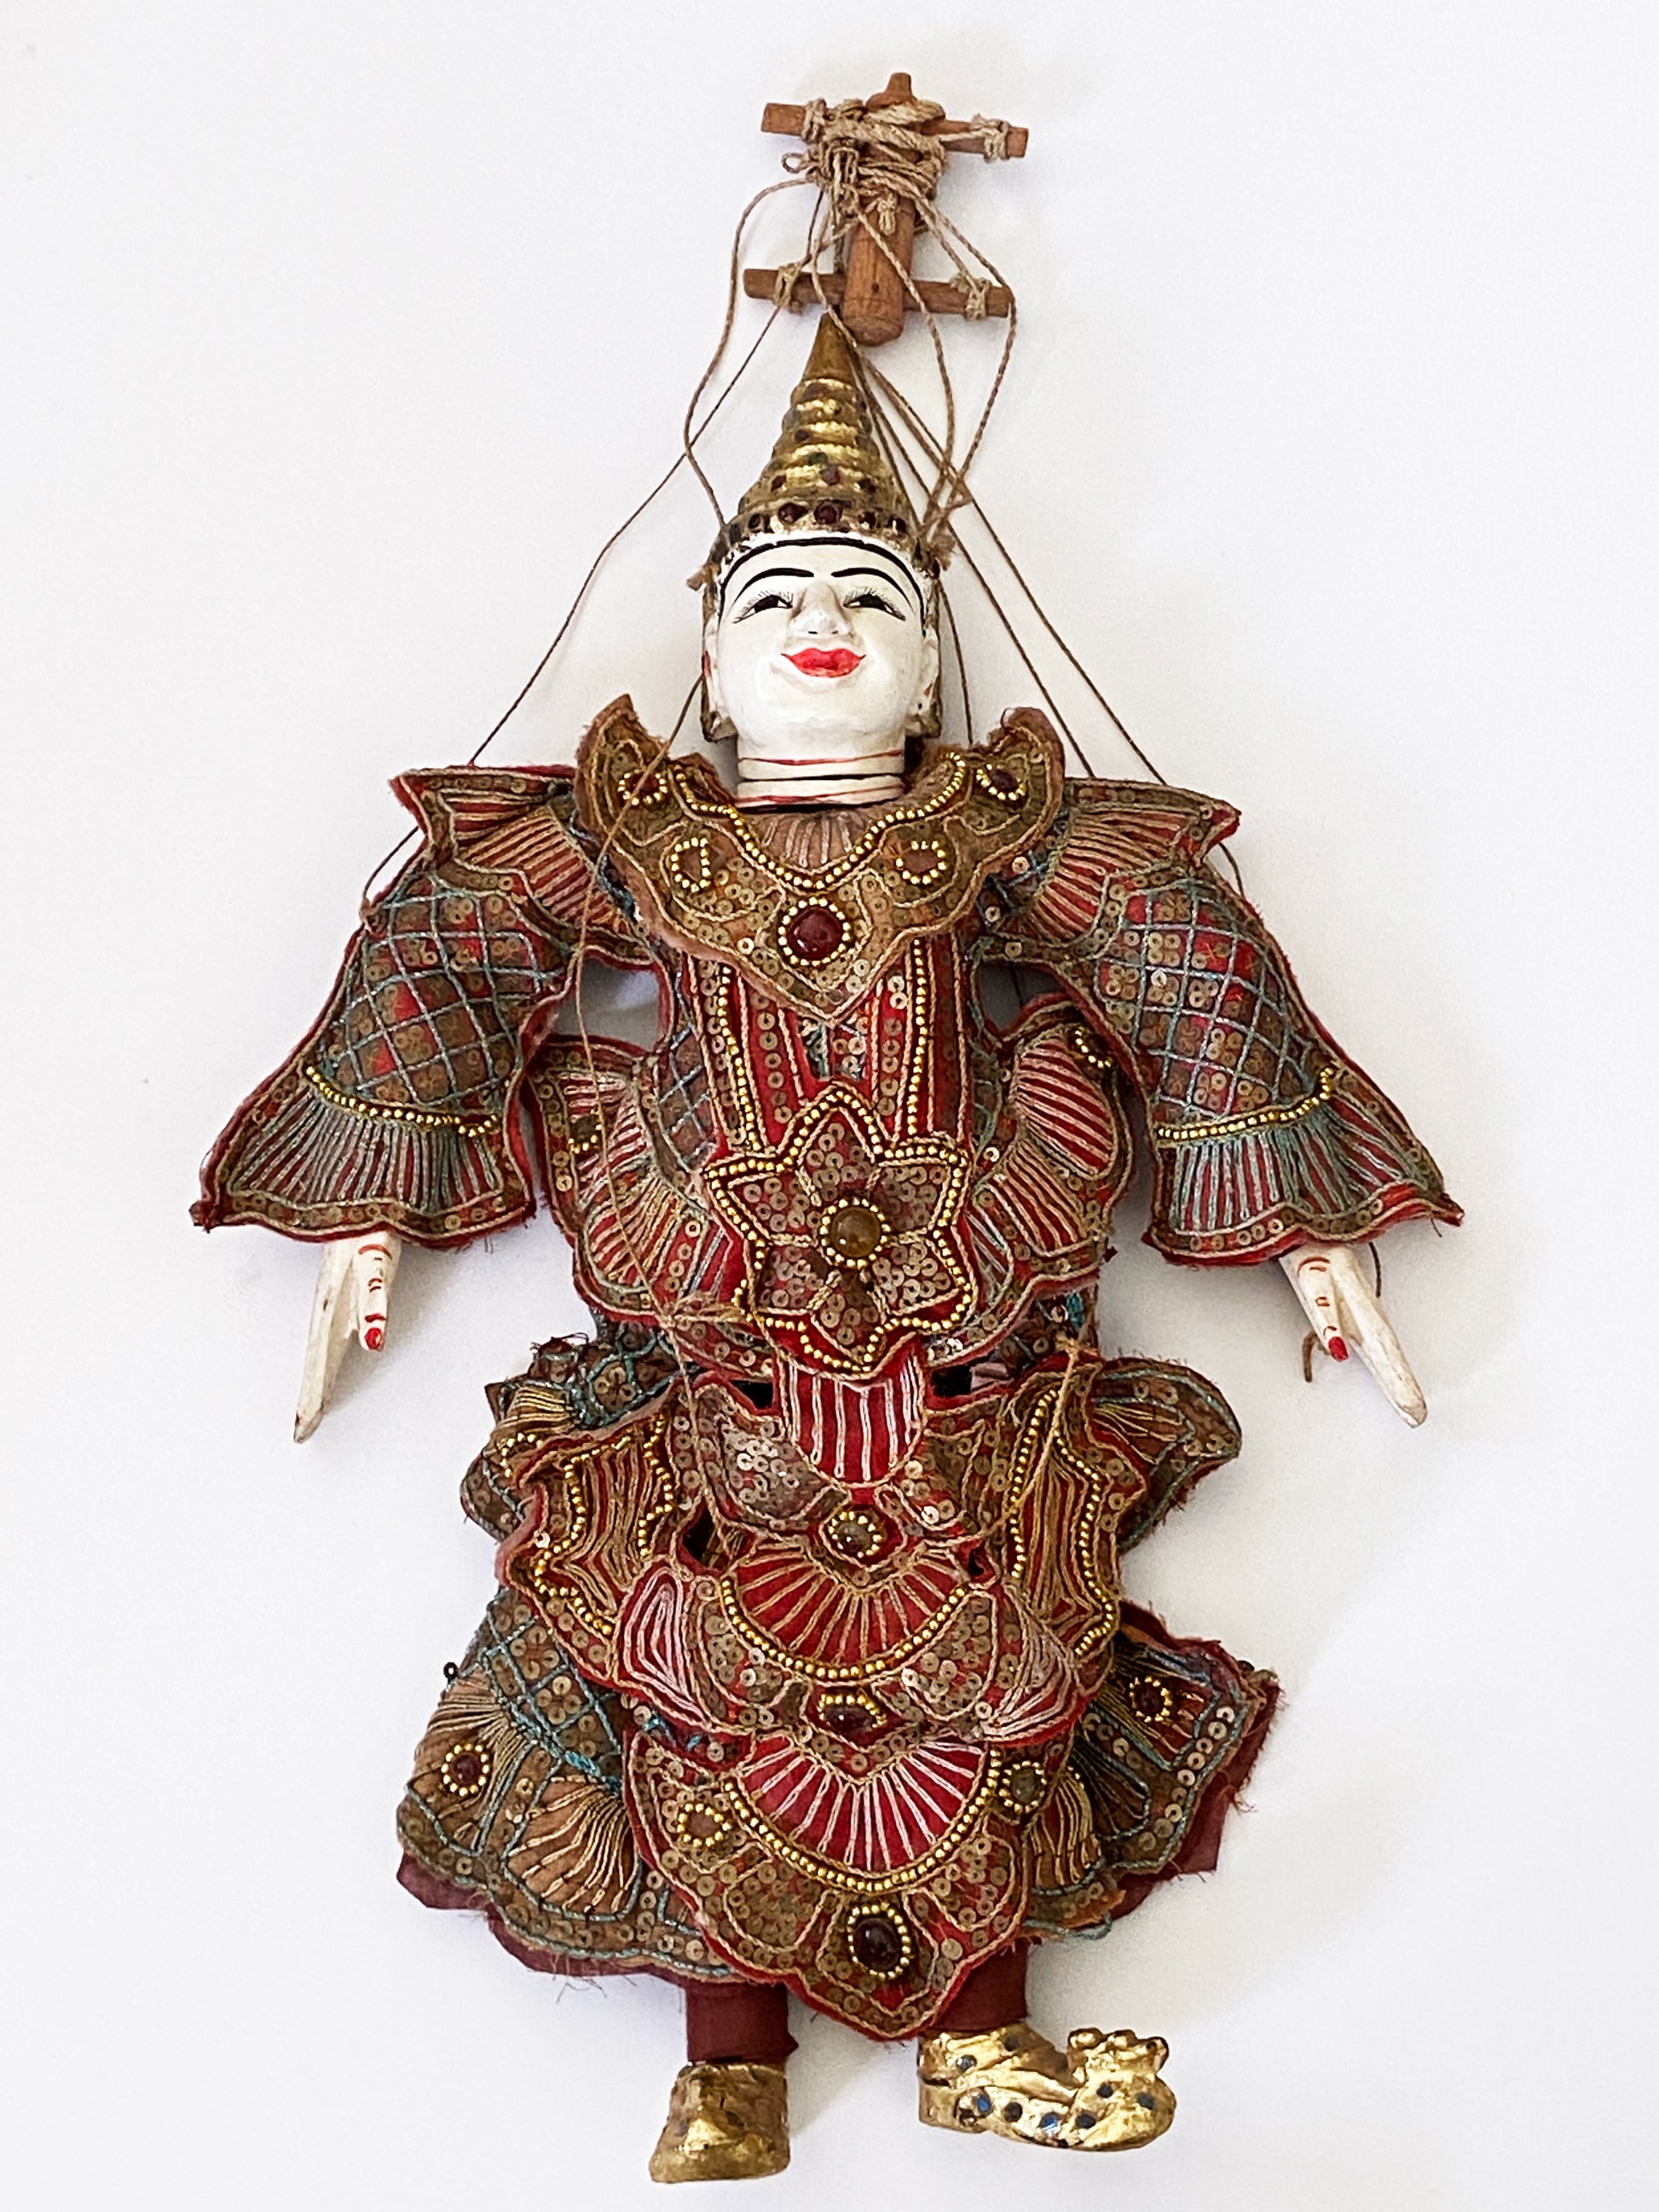 Antique Marionette Puppet from Burma